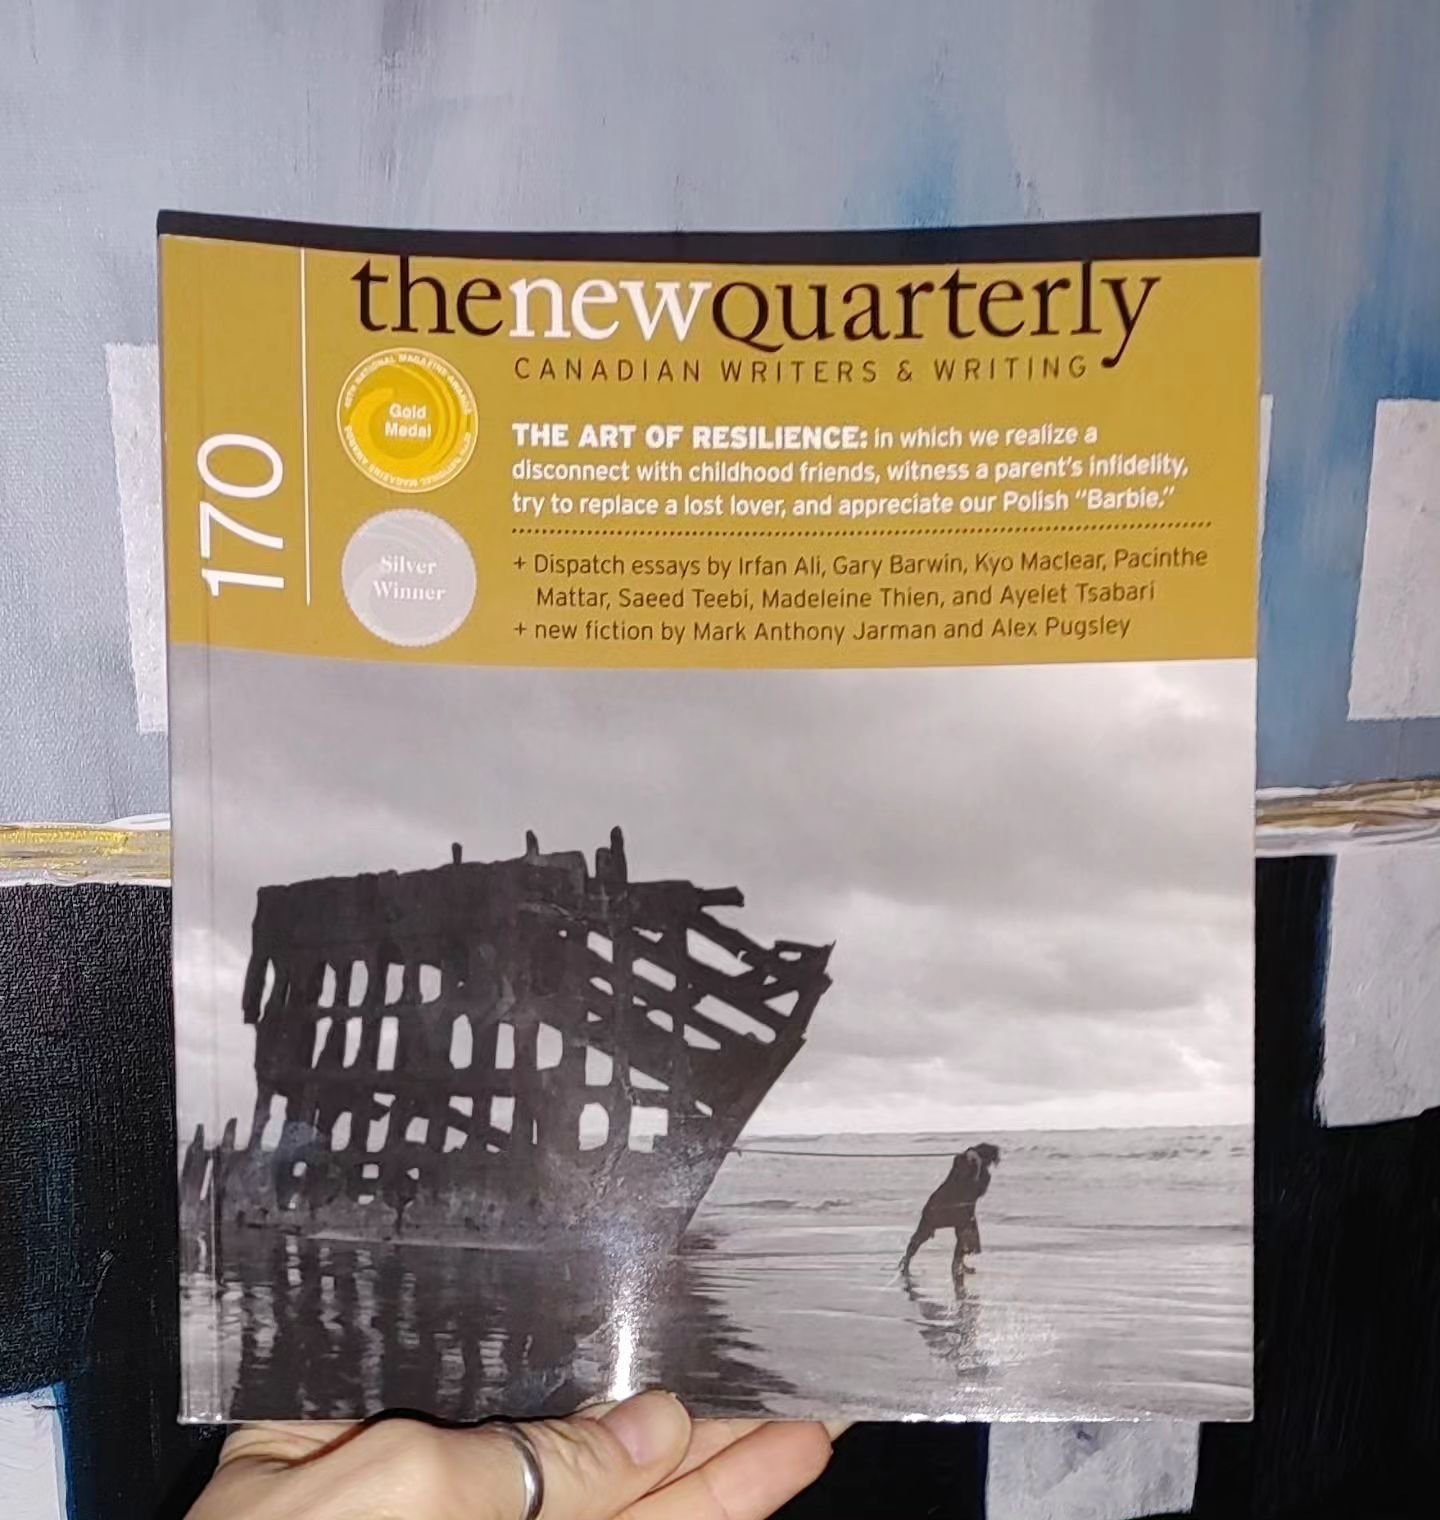 Two great pieces in the latest issue of The New Quarterly. Madeleine Thien and Ayelet Tsabari bringing some nuance and compassion to the current world.